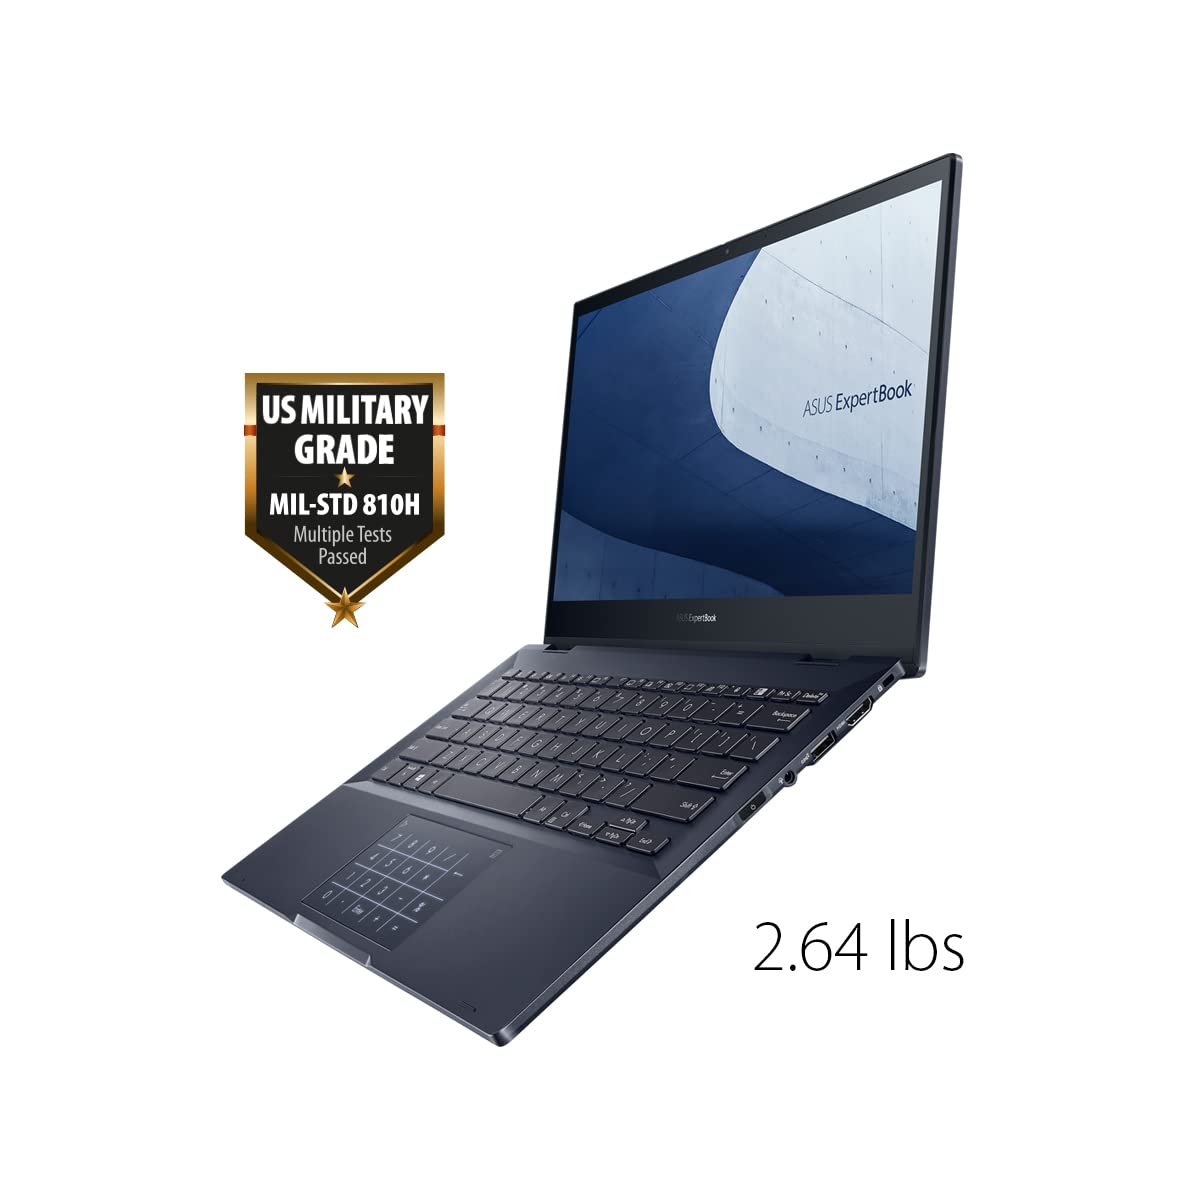 (Brand Refurbished) ASUS ExpertBook Laptop - With Enterprise-grade Security B5302FEA-LF0577R Inter Core i7 11th Gen 8GB RAM 512GB SSD with windows 11 Pro and OLED hi-res Display